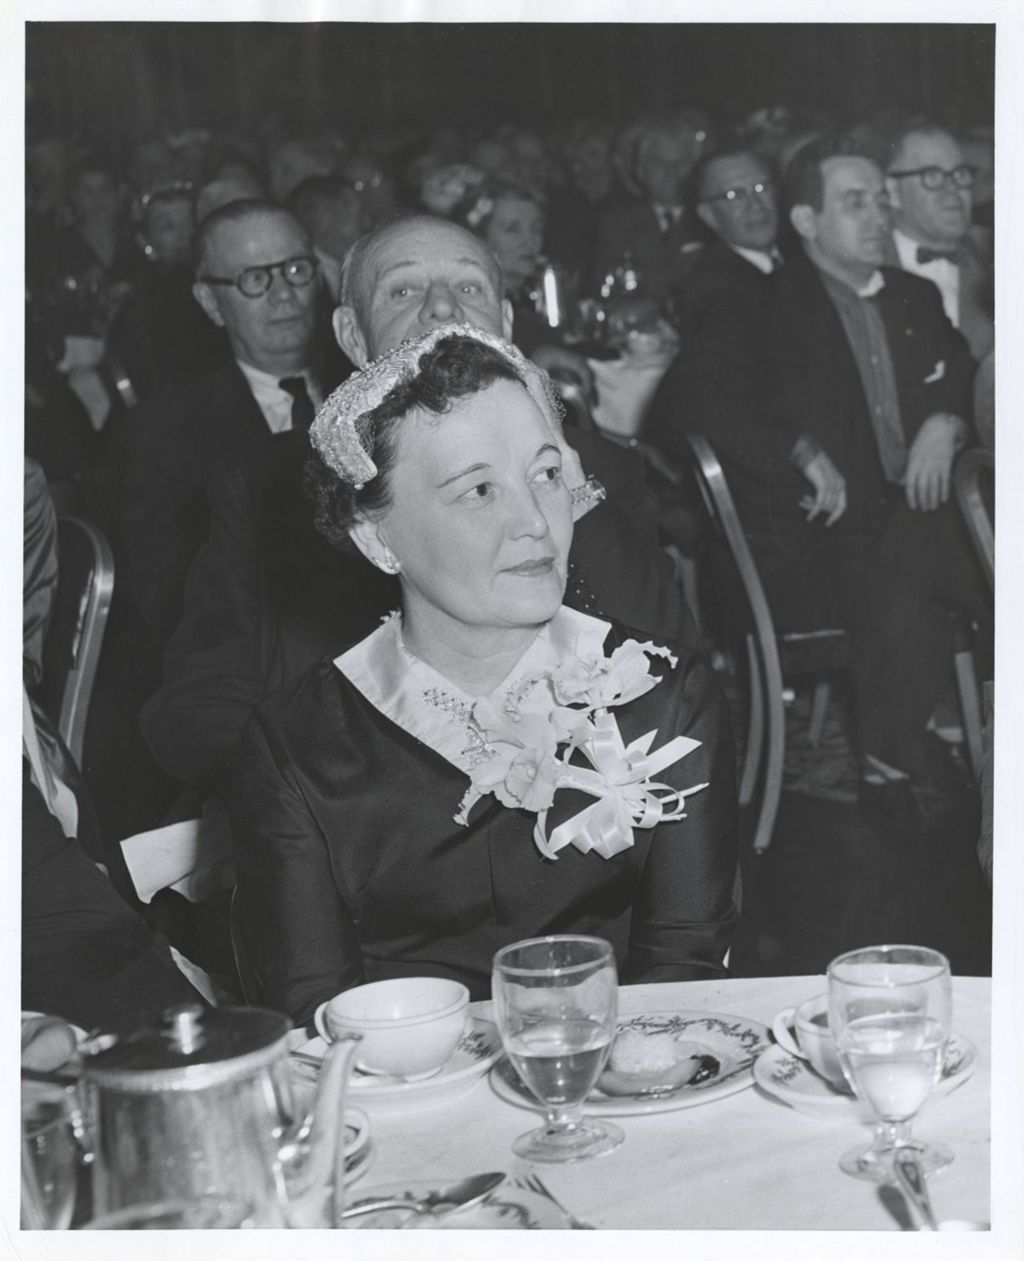 Eleanor Daley at a dining event